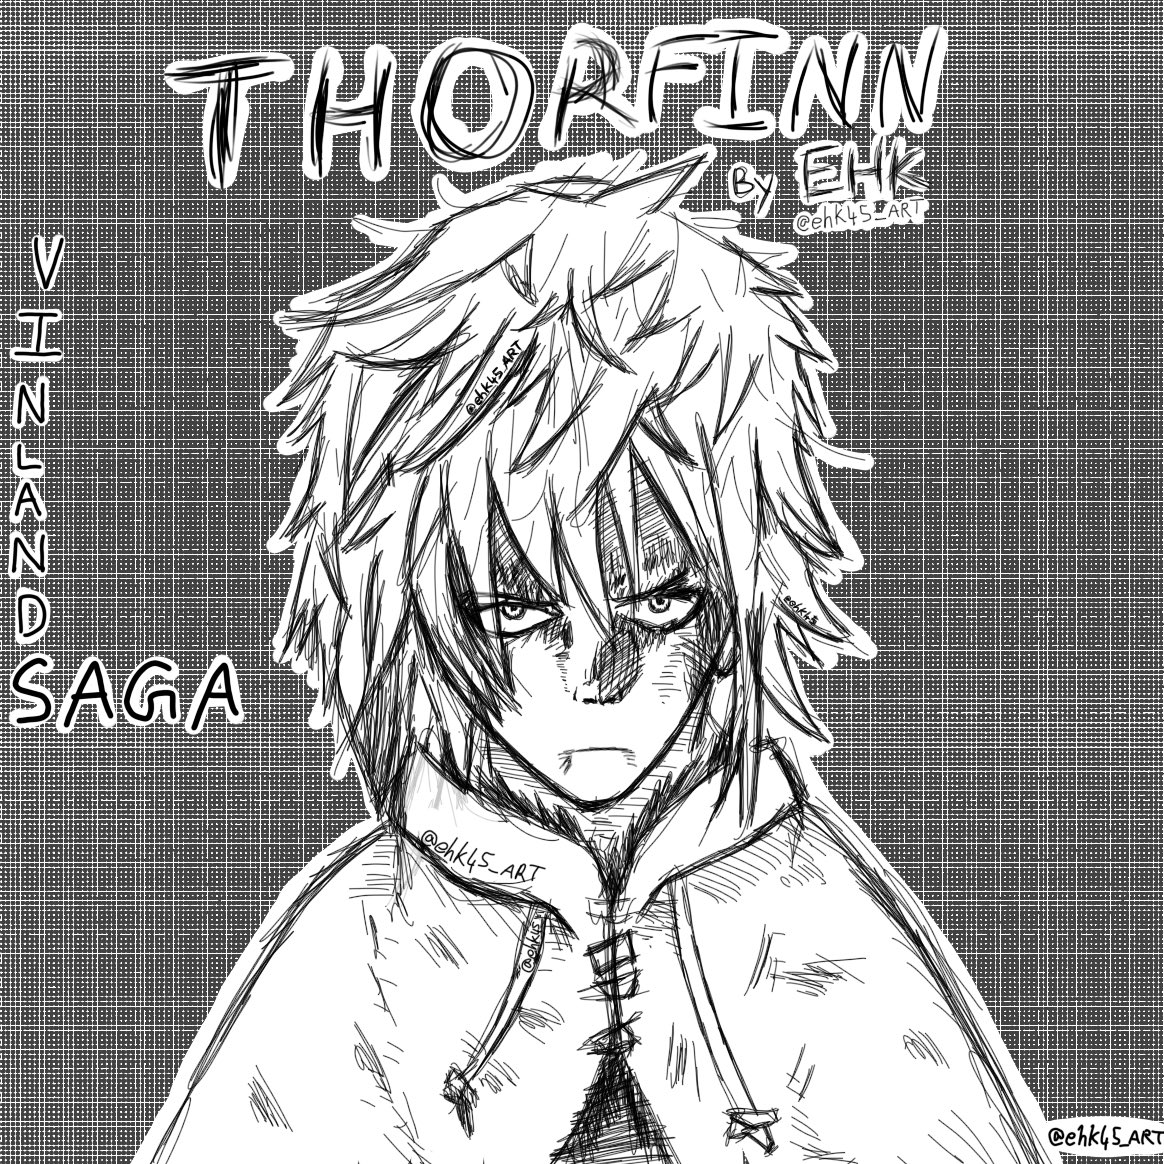 Thorfinn Son of Thor’s 
Ye my manga artstyleee:))

How is it??

Likes and Retweets are appreciated 
Also looking for #artmoots 

#digitalart #mangaart #thorfinn #VINLAND_SAGA https://t.co/NM6HFFD4OL